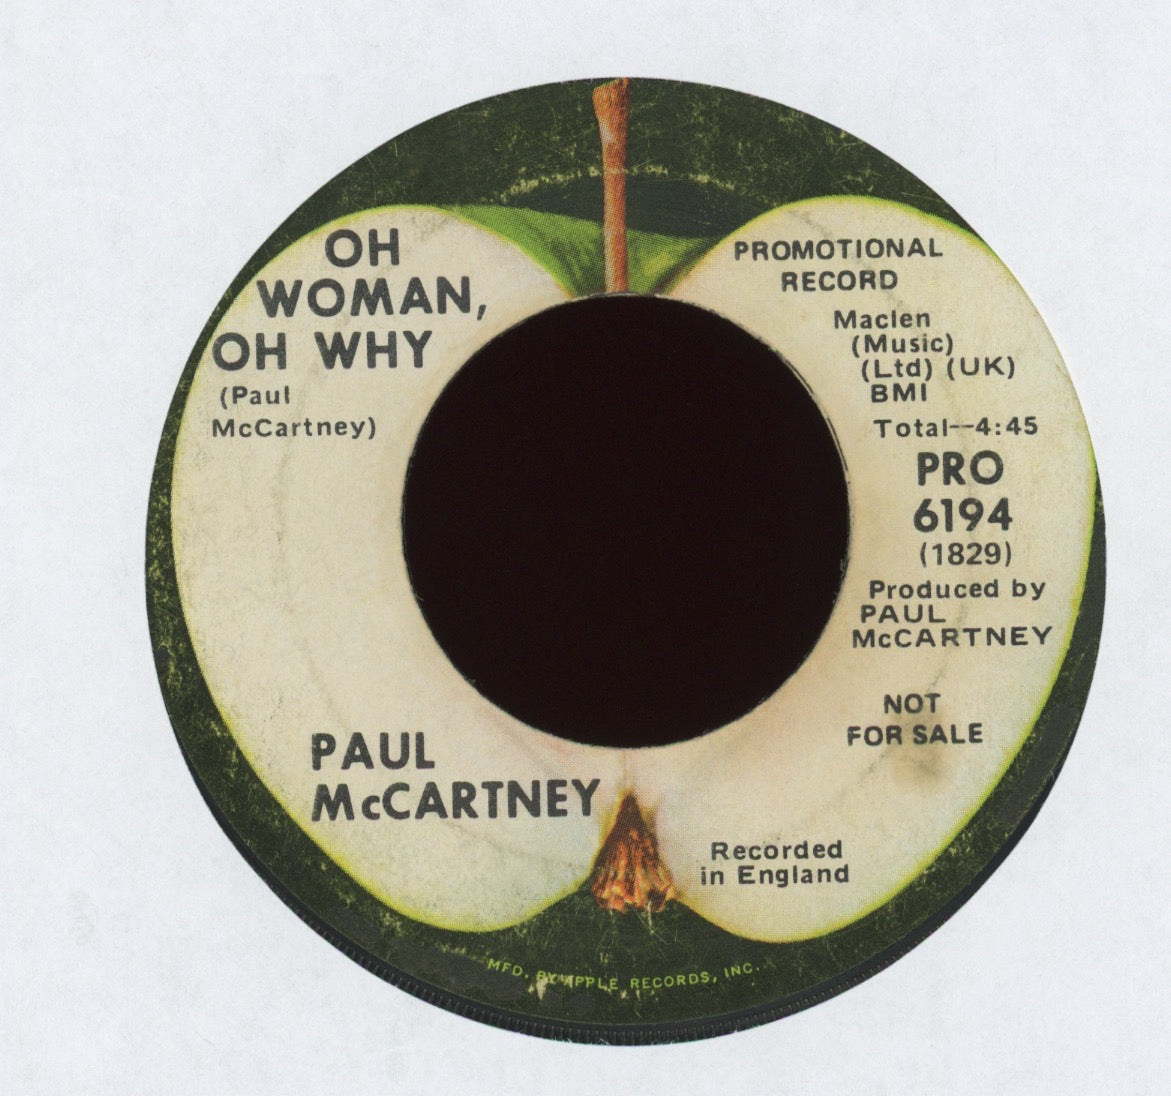 Paul McCartney - Another Day on Apple Promo Rock 45